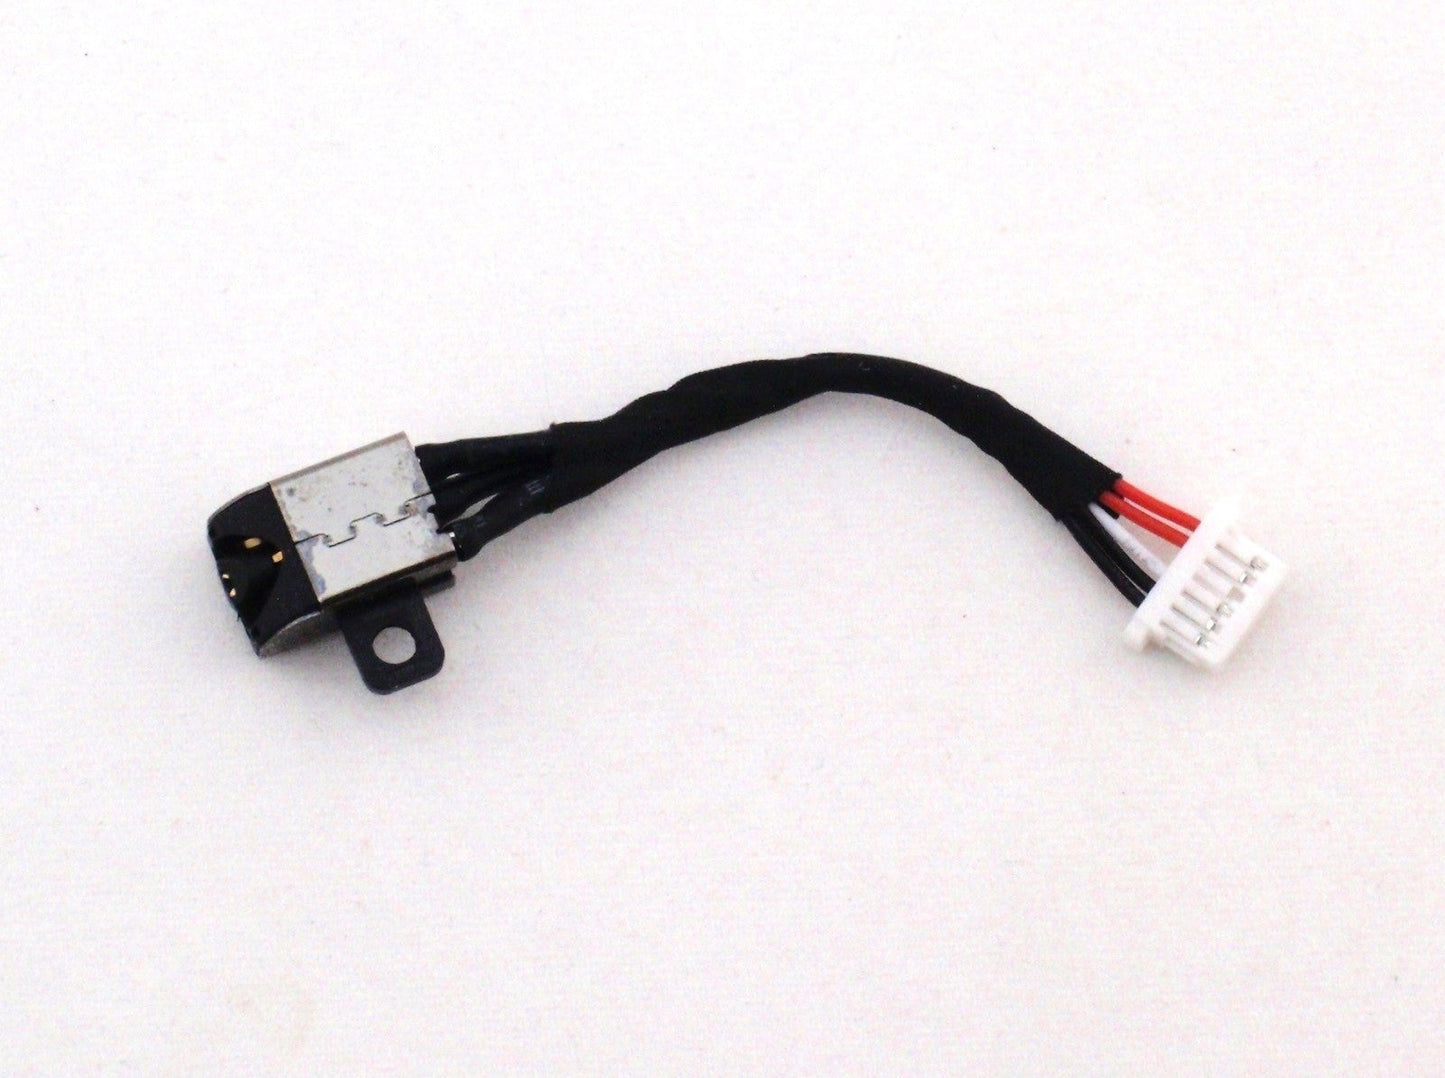 Dell DC In Power Jack Charging Port Cable 0GDV3X Inspiron 11 3000 3162 3164 3168 3169 3179 3185 450.07604.0001 .1001 .2001 GDV3X